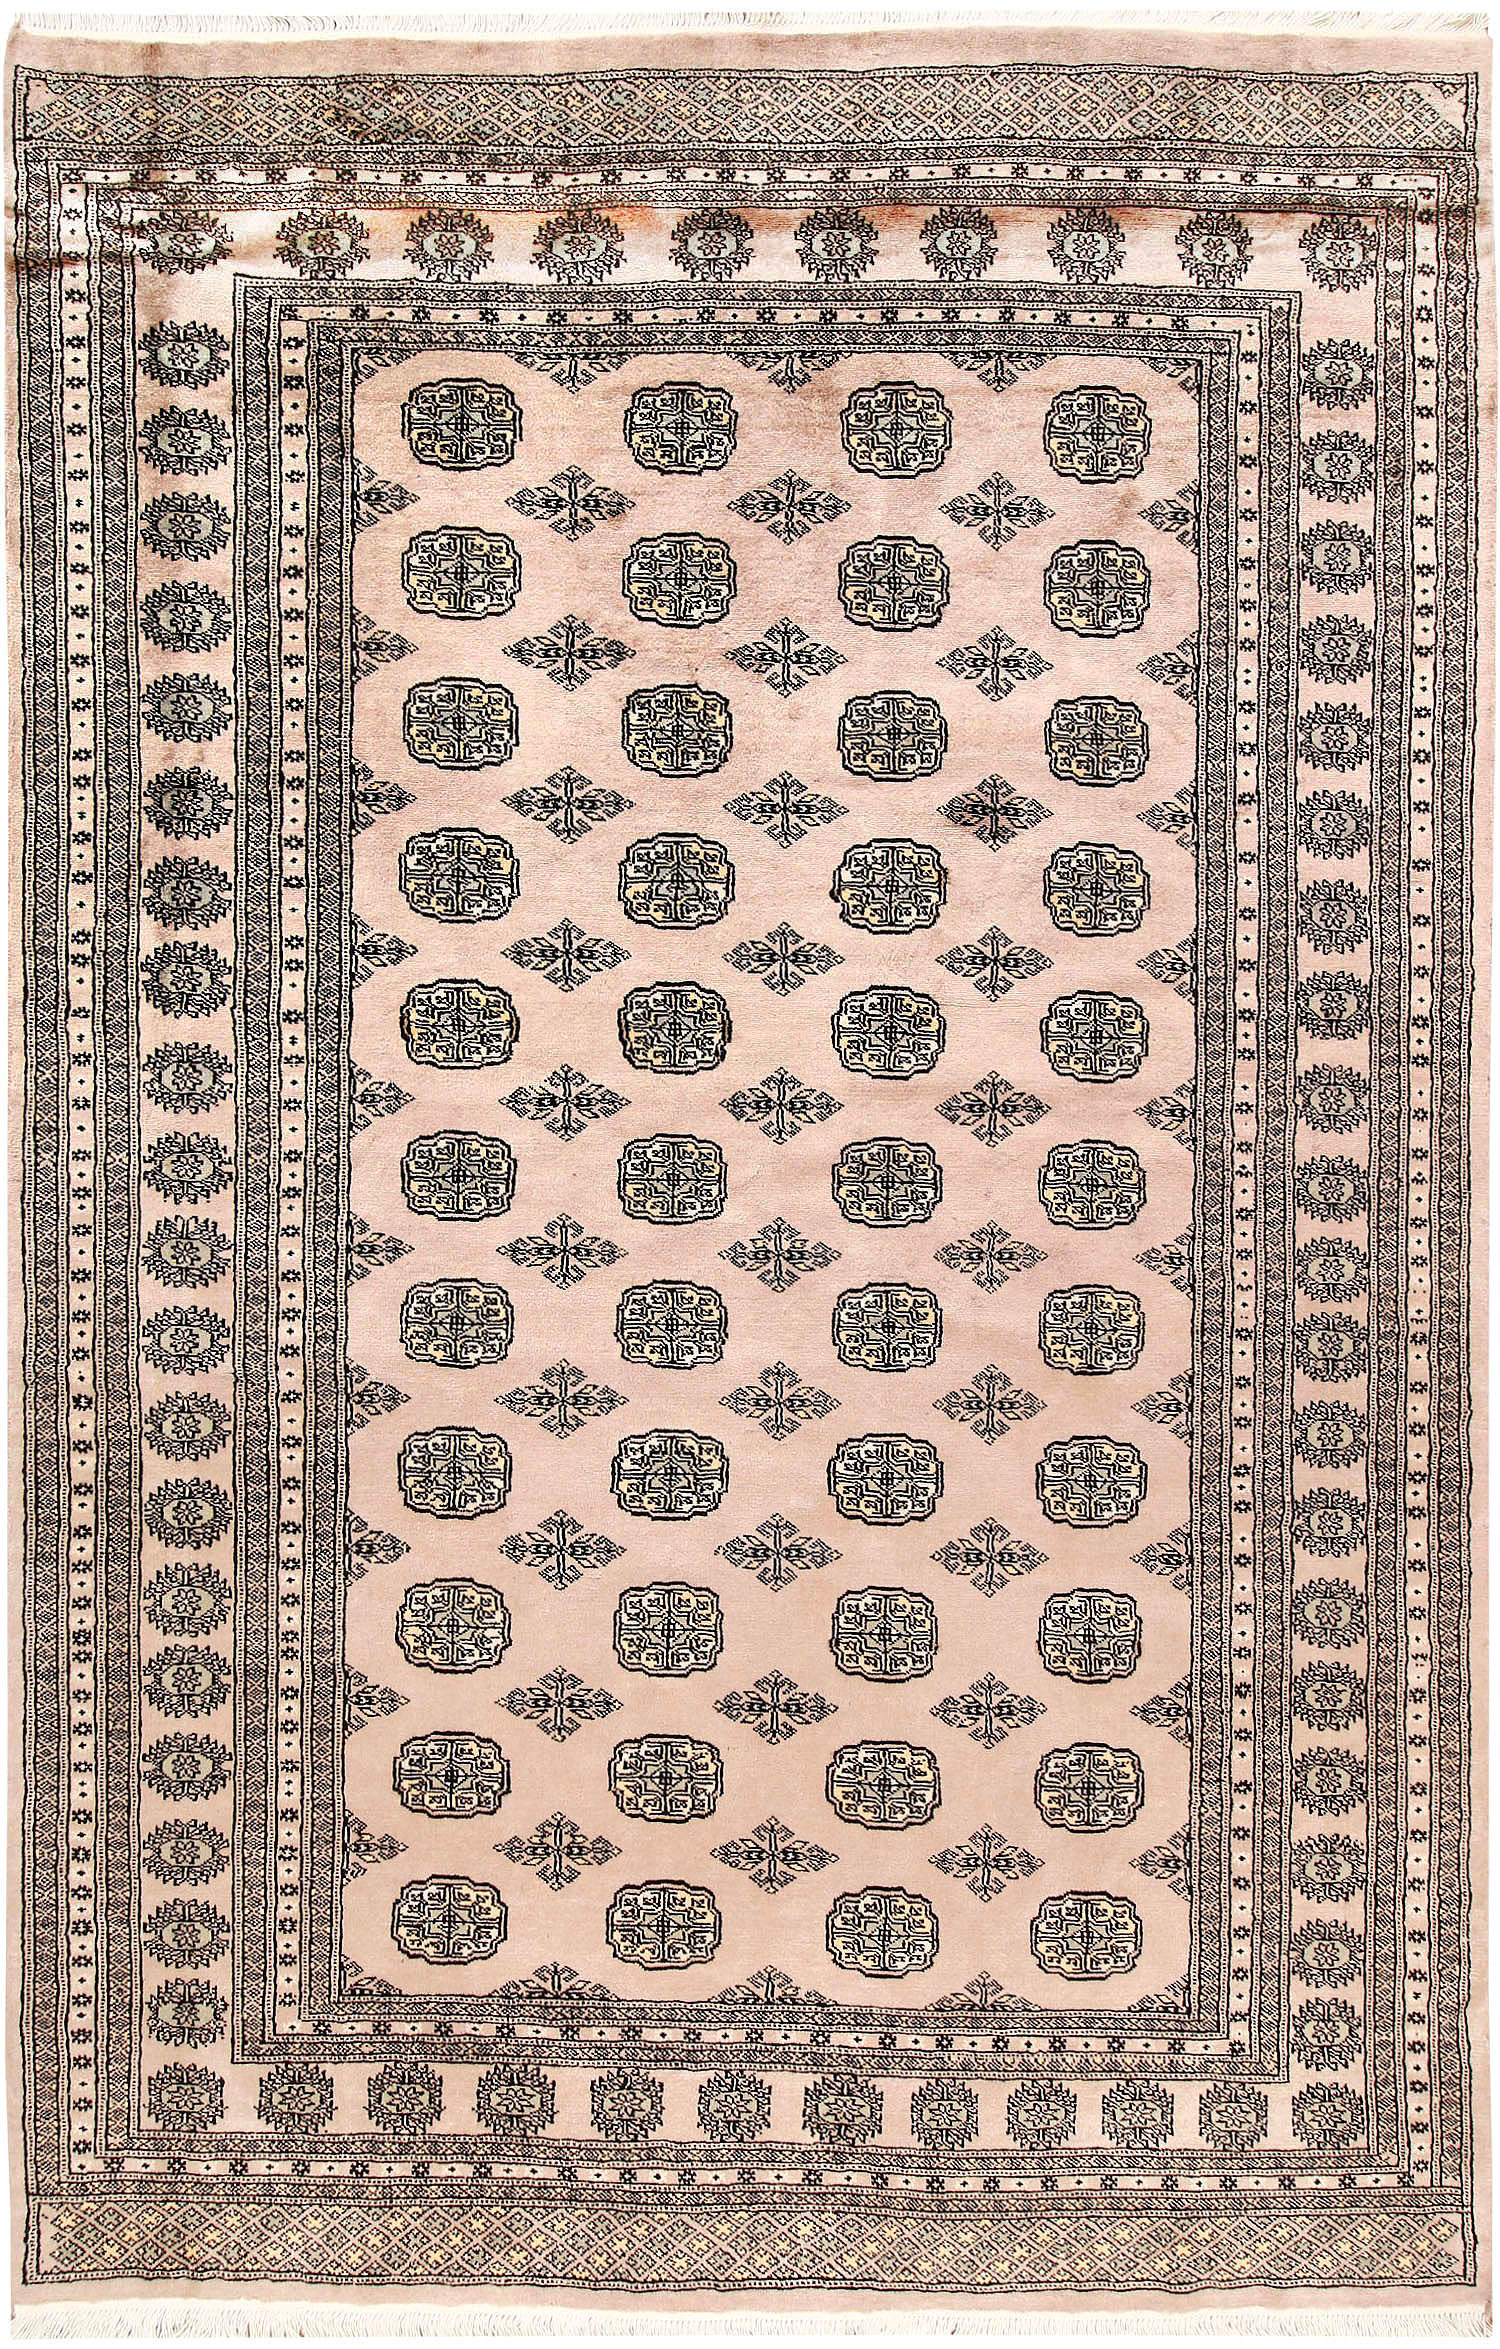 Buy Antique White Bokhara 5 6 X 9 Rectangle Rugs On Sale